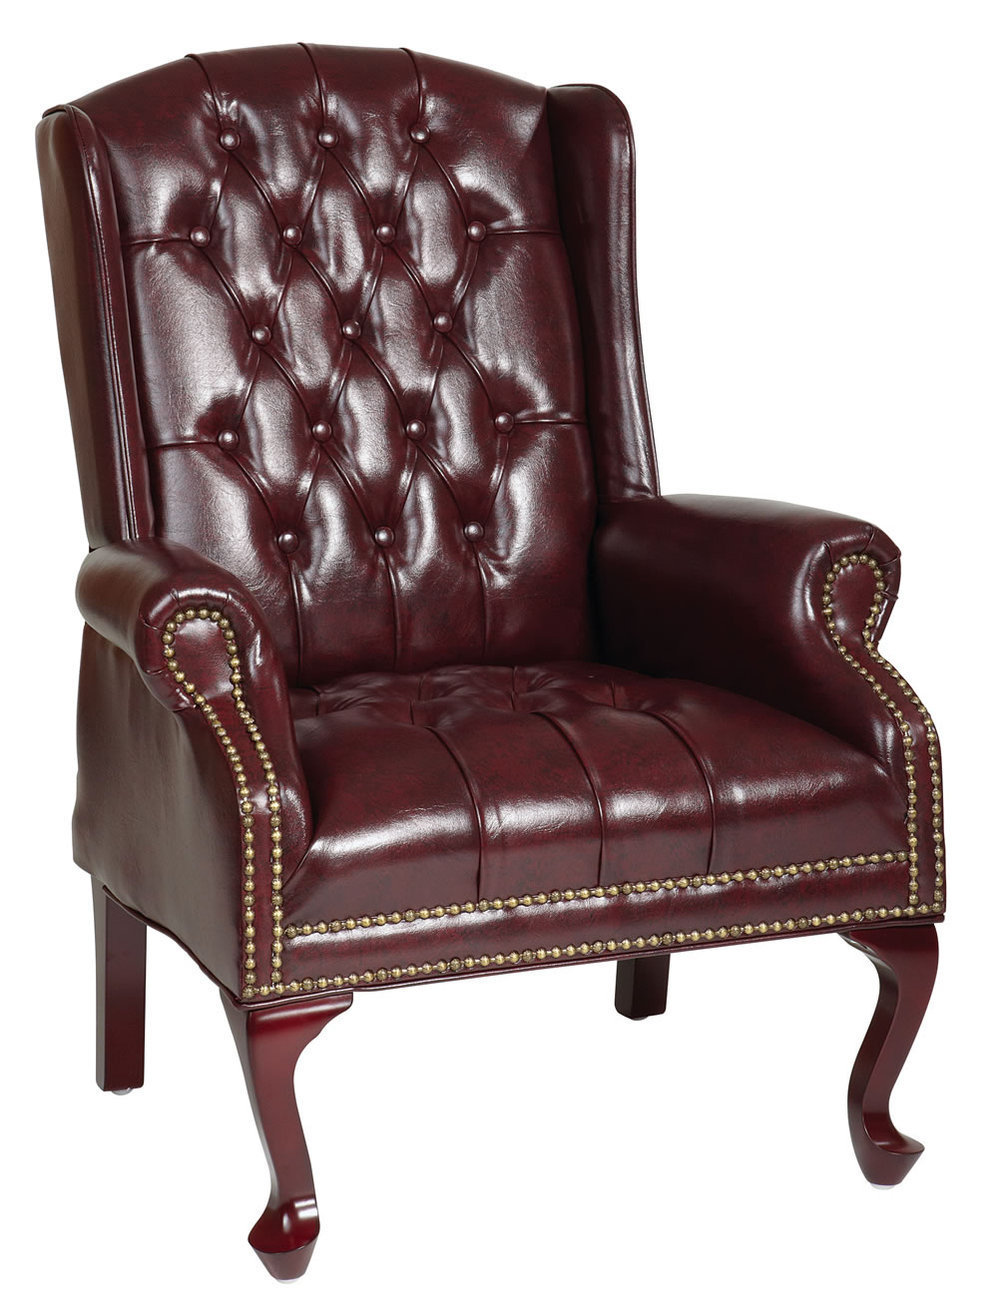 Oxblood Vinyl Tufted Back Queen Anne Wing Back Lounge Traditional Chair ...